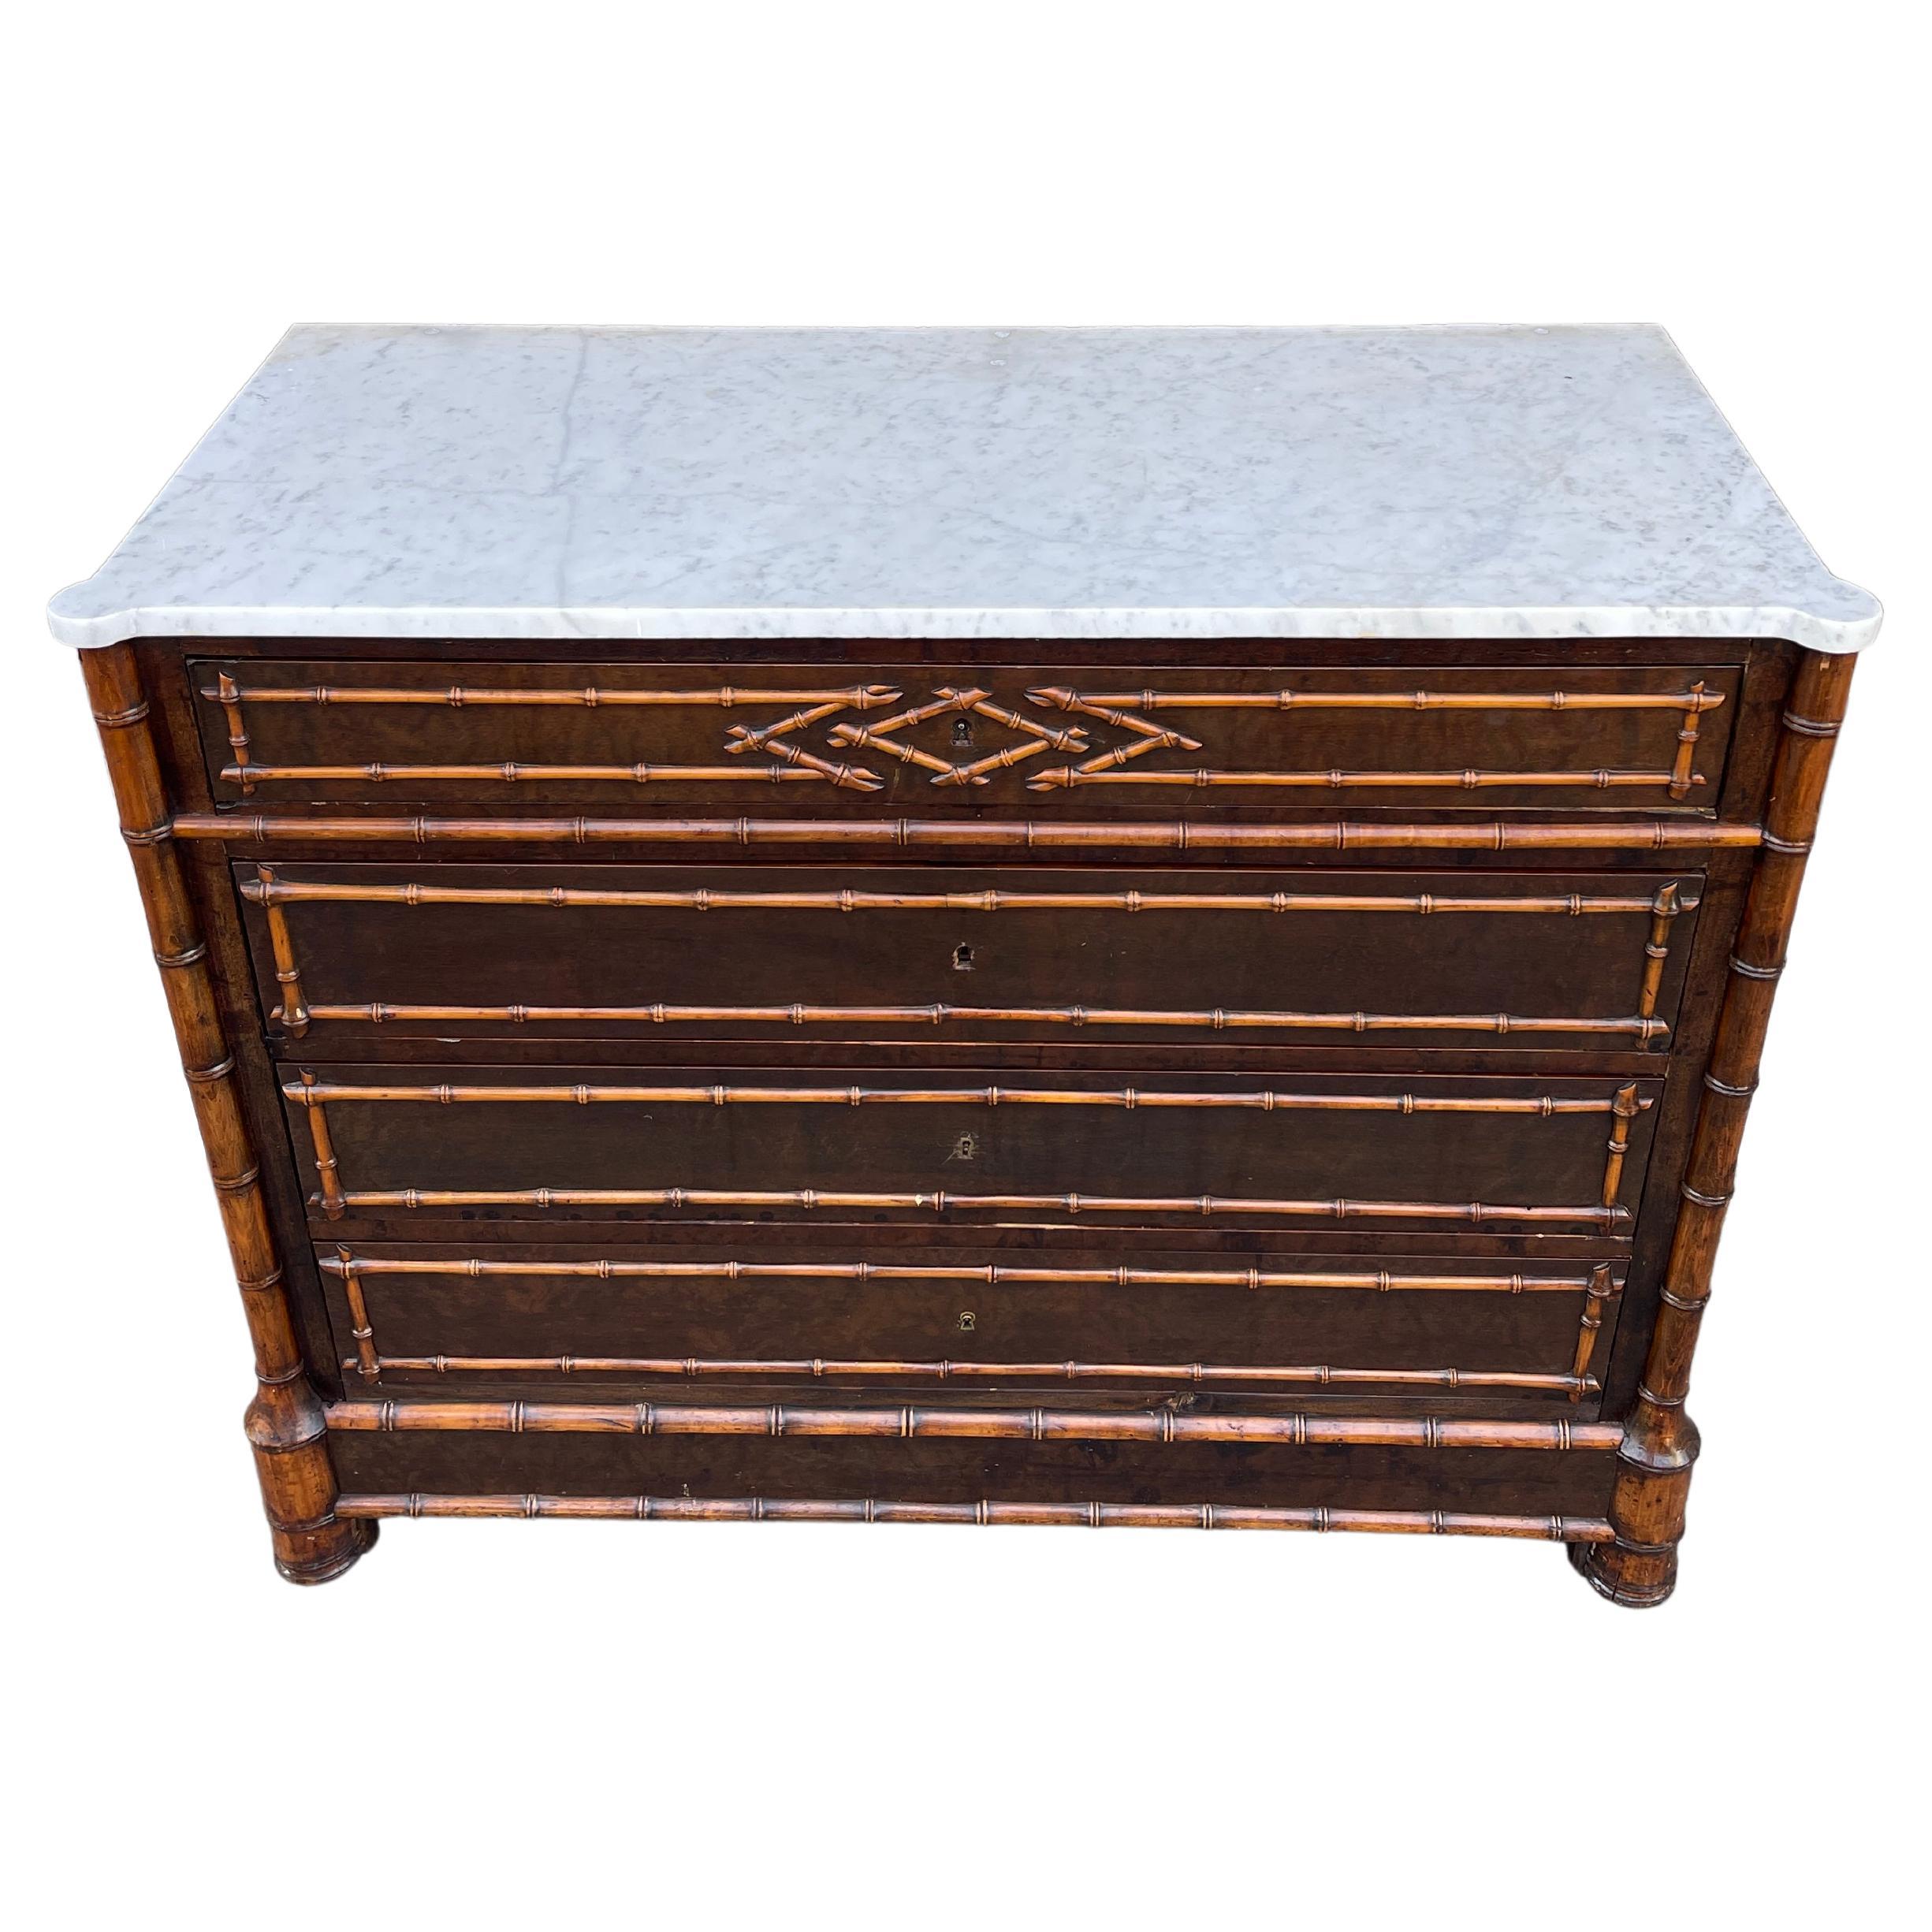 French Fruitwood Faux Bamboo Chest with White Marble Top, Early 20th Century 